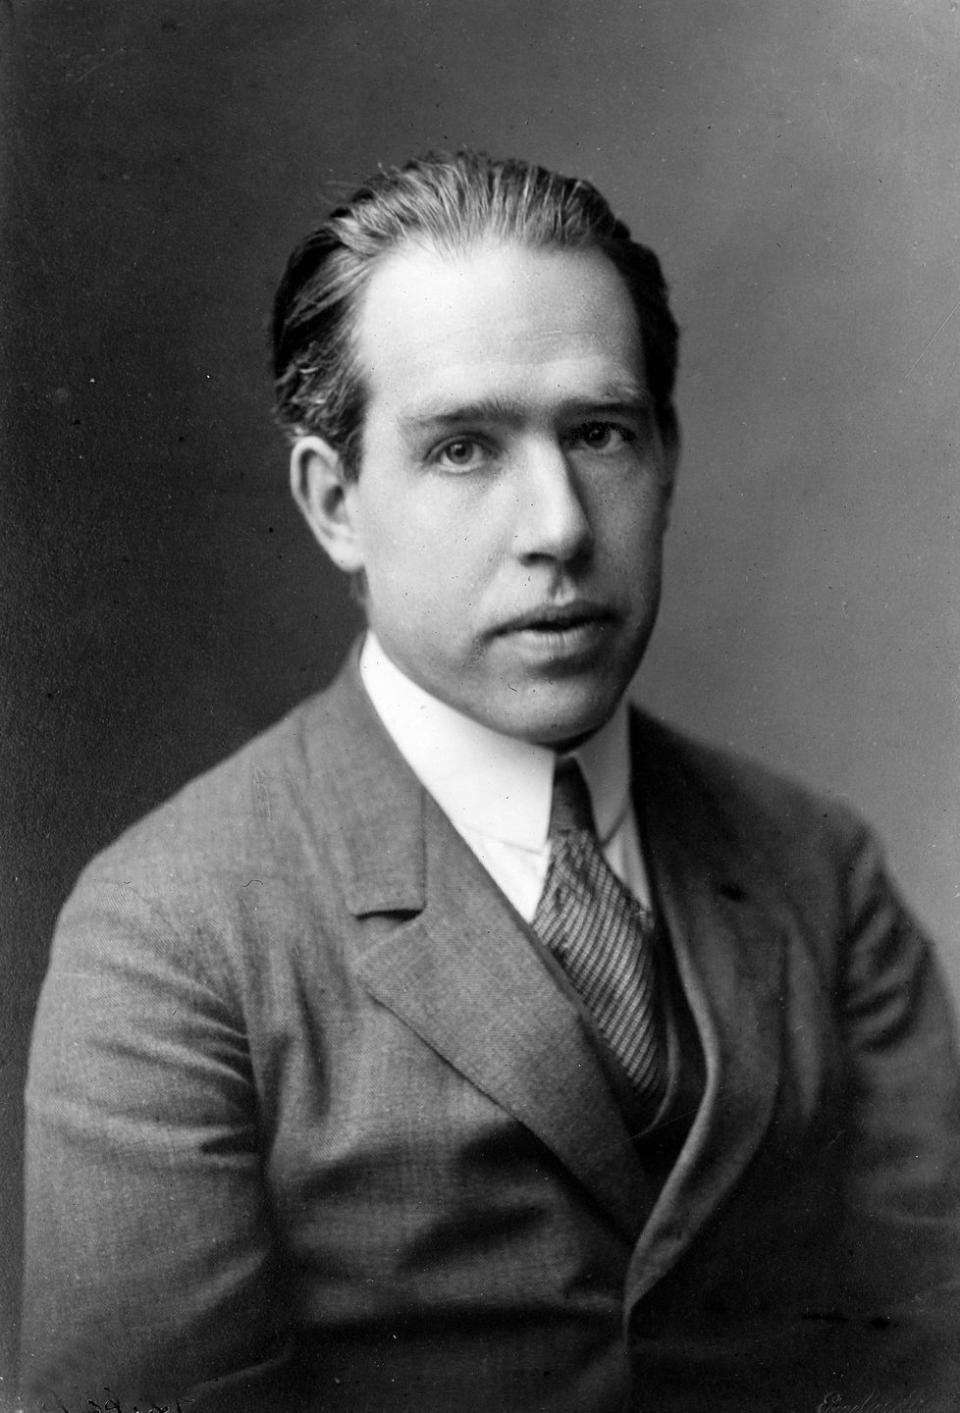 neils bohr looks at the camera, he wears a suit jacket, collared shirt and tie